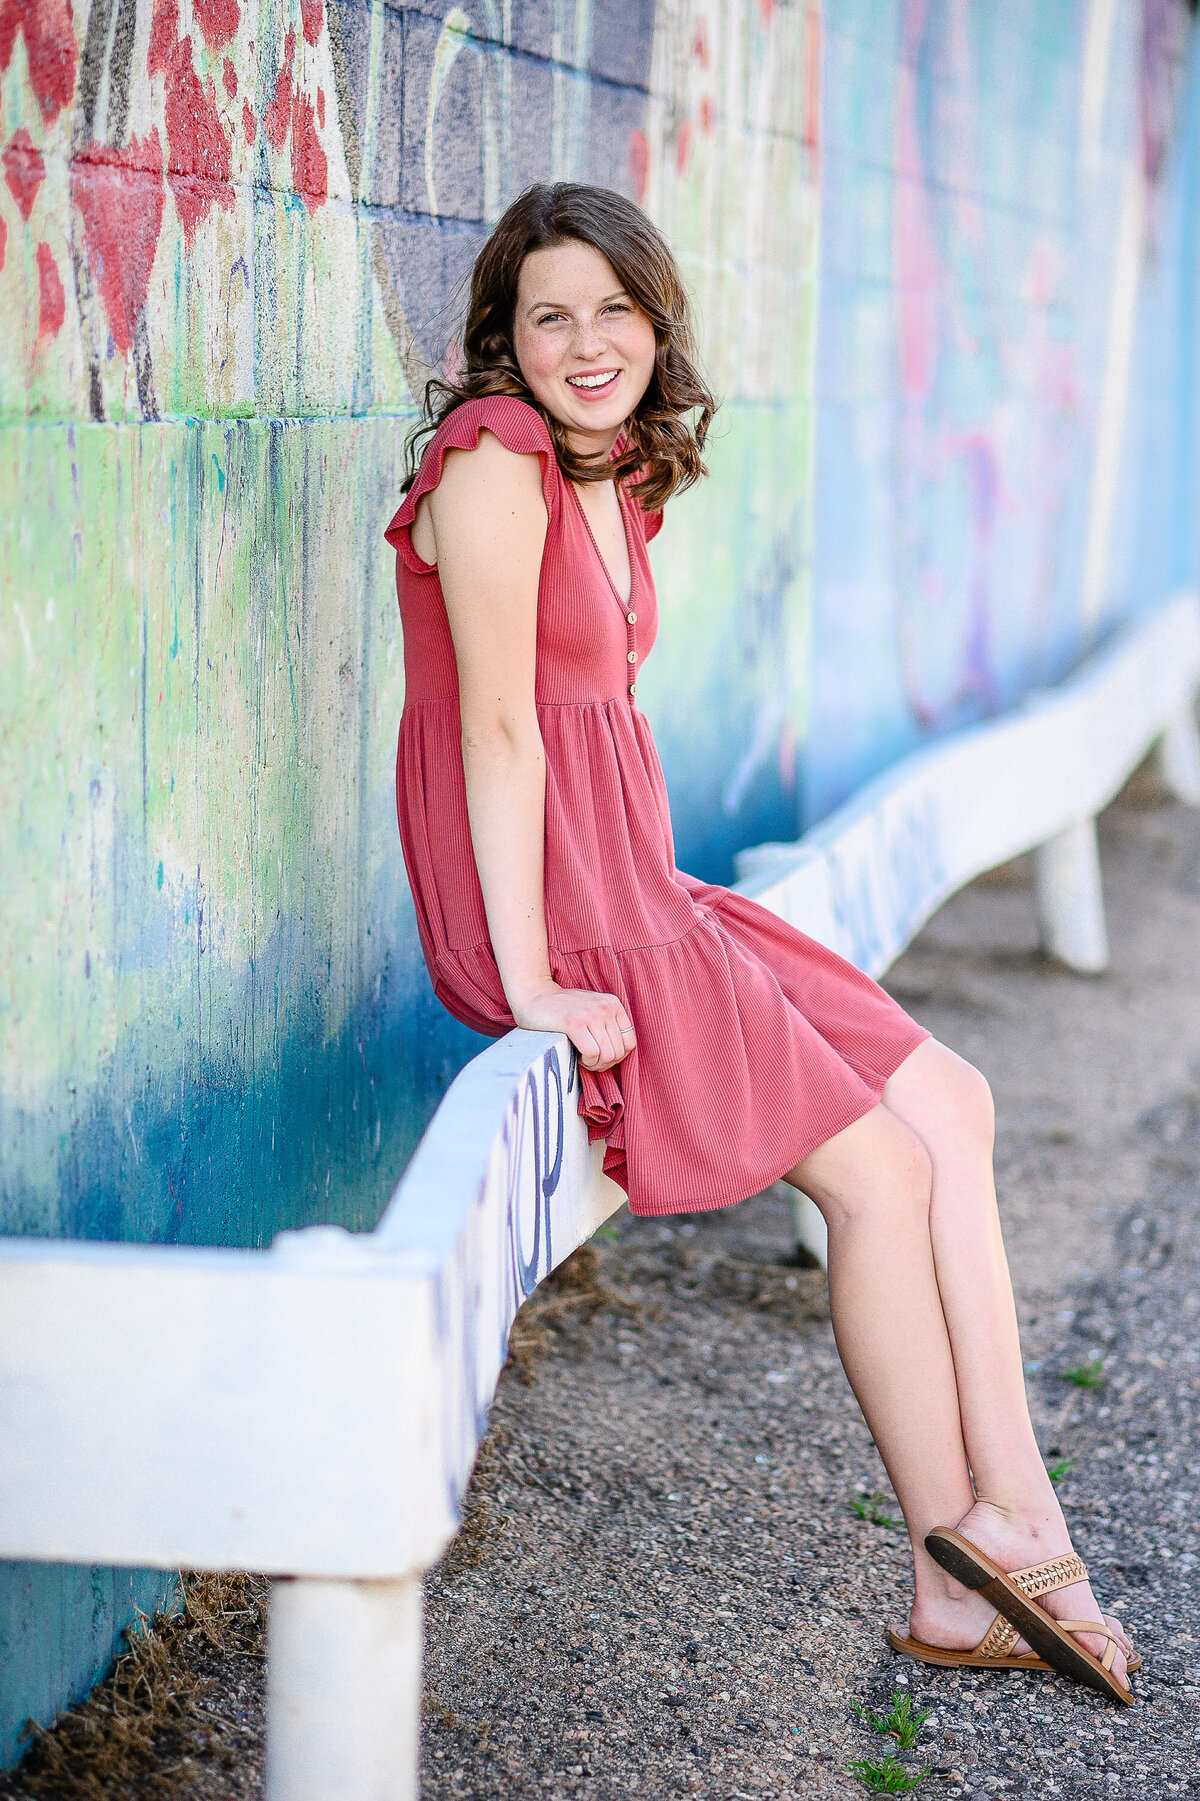 senior picture photographers near me  captures senior picture dresses with girl wearing a pink sun dress sitting on a wooden fence next to wall art in Denver